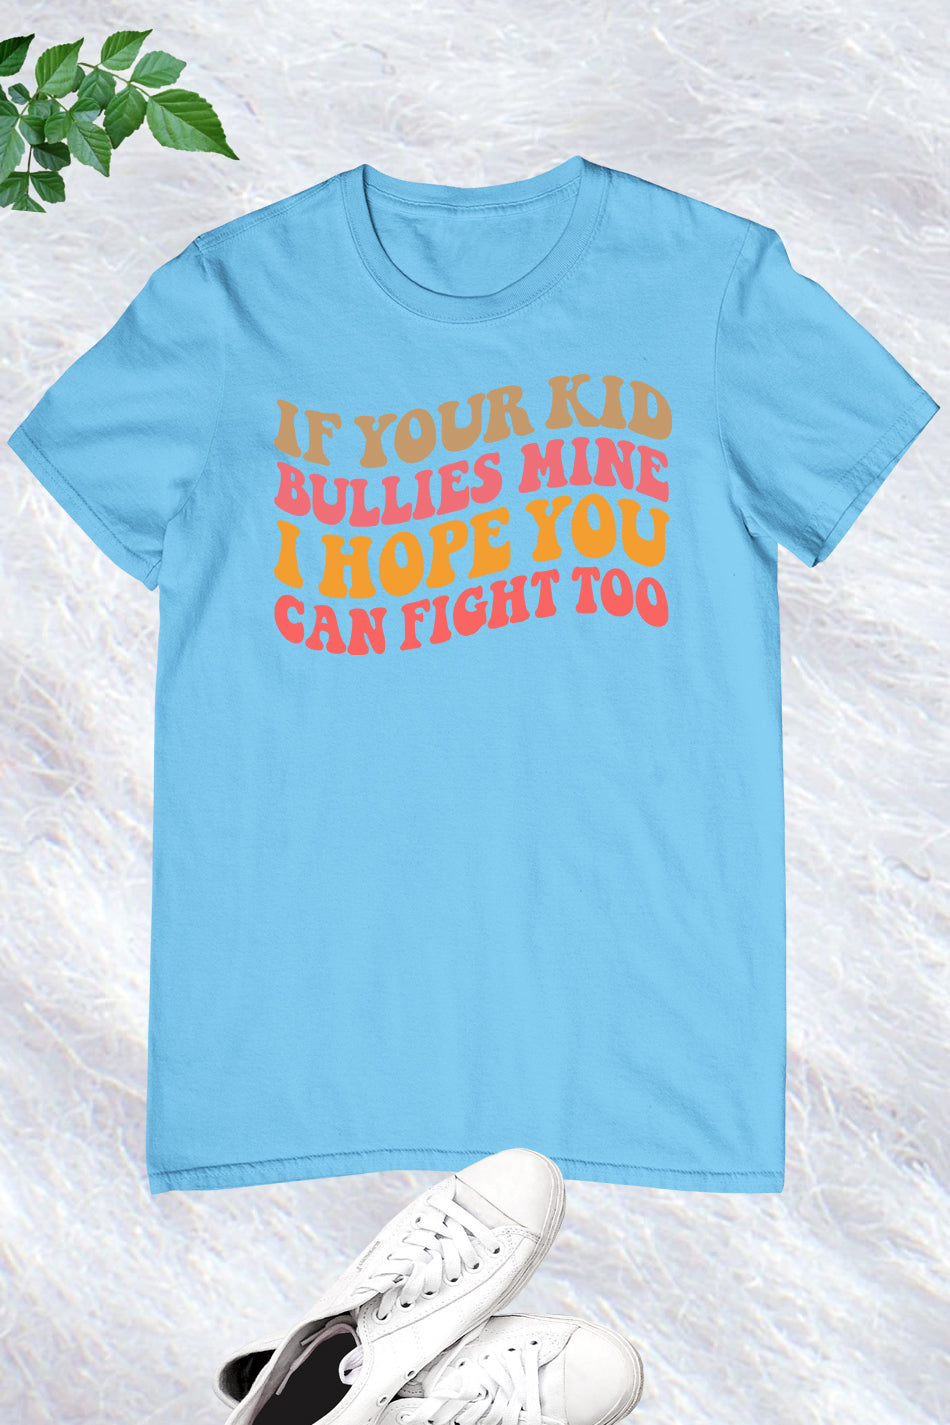 If Your Kids Bullies Mine I Hope You can Fight Too Shirt